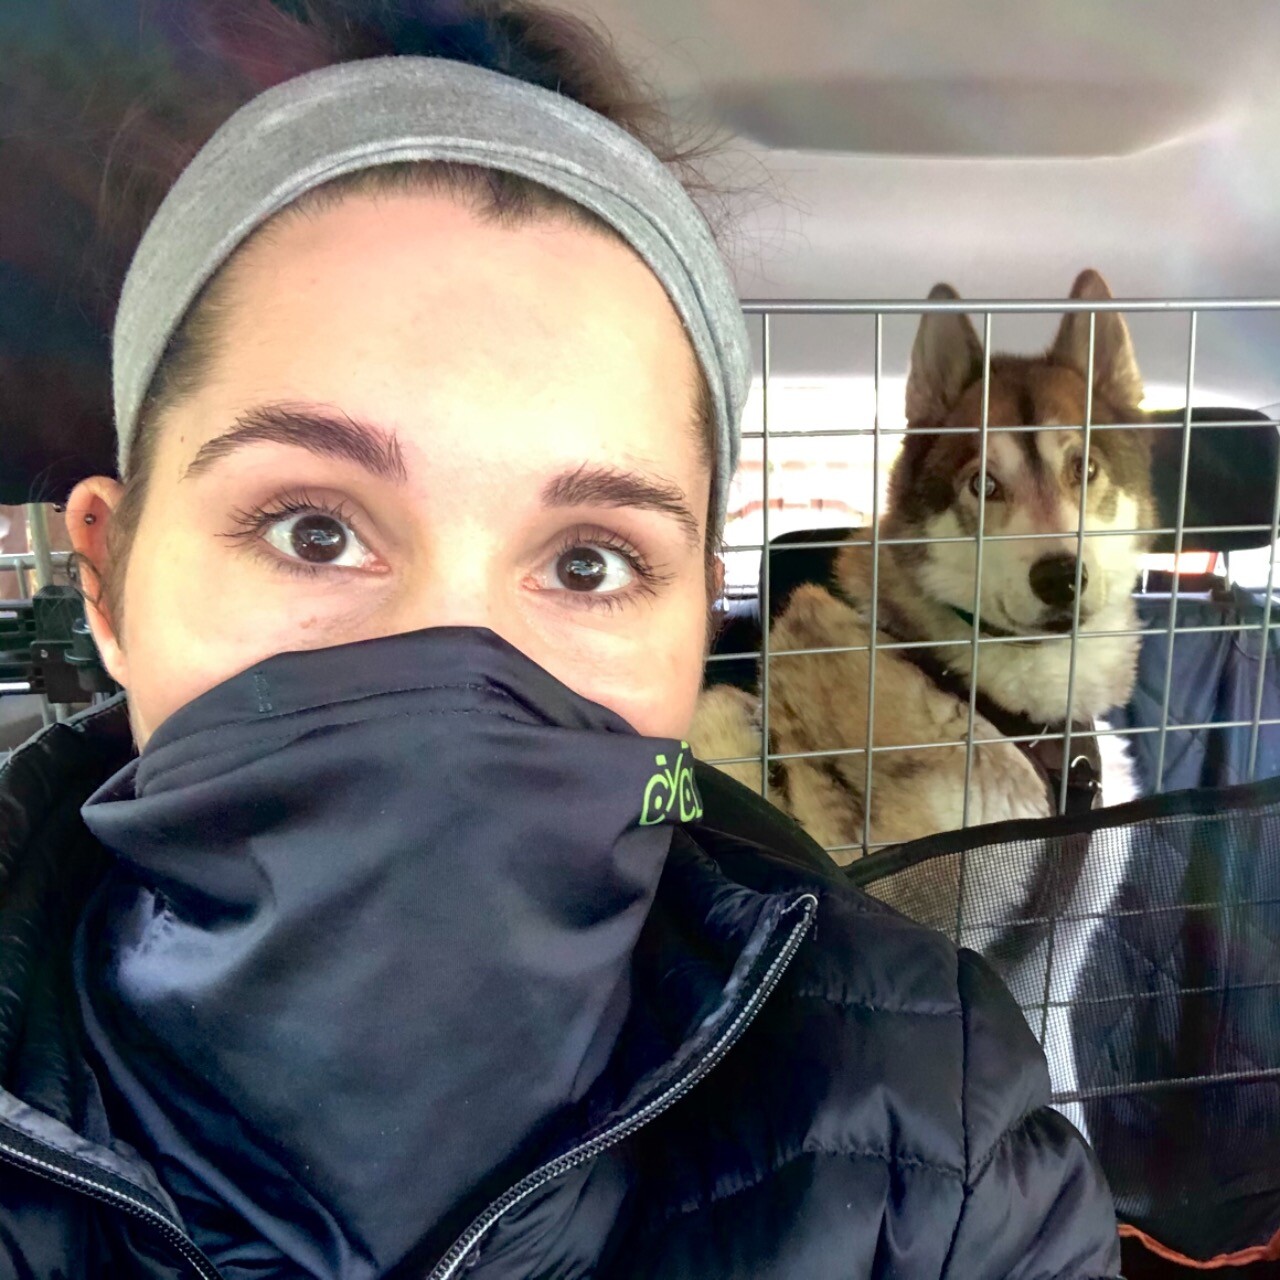 Me wearing a face mask sitting in the car driver’s seat while Osky sits in the back behind a dog guard looking at me.